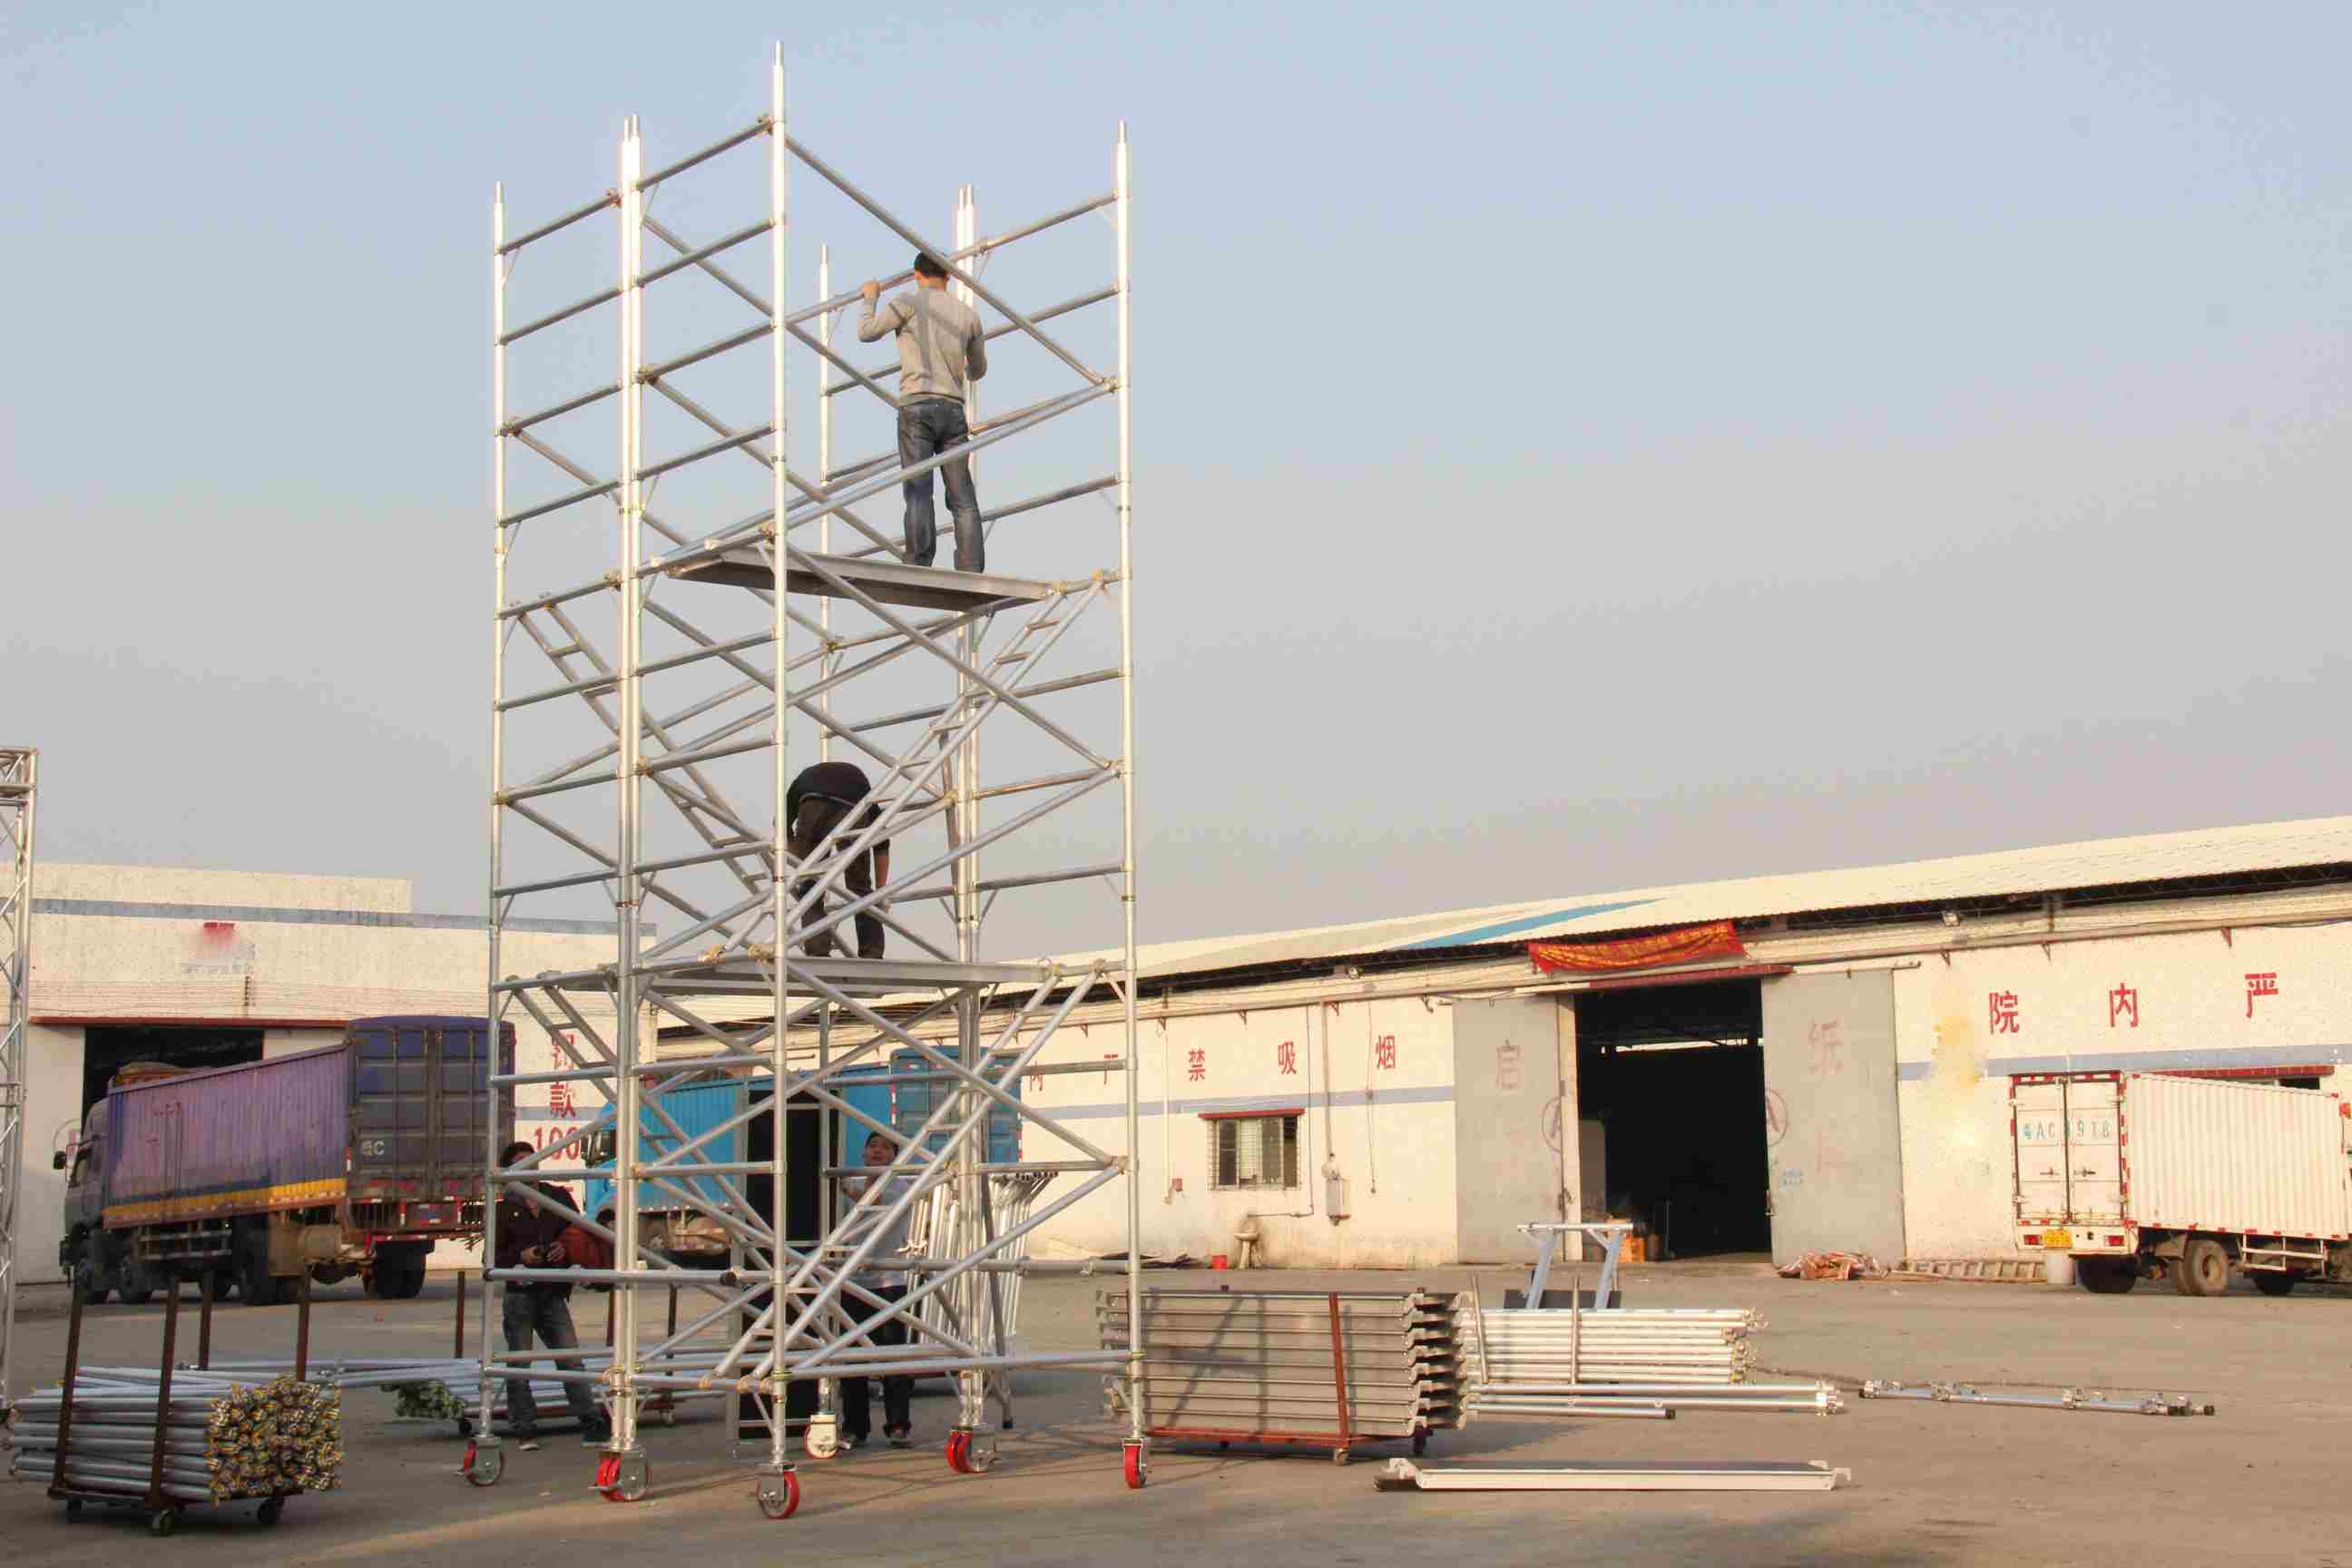 How do you assemble and disassemble aluminum mobile scaffolding?